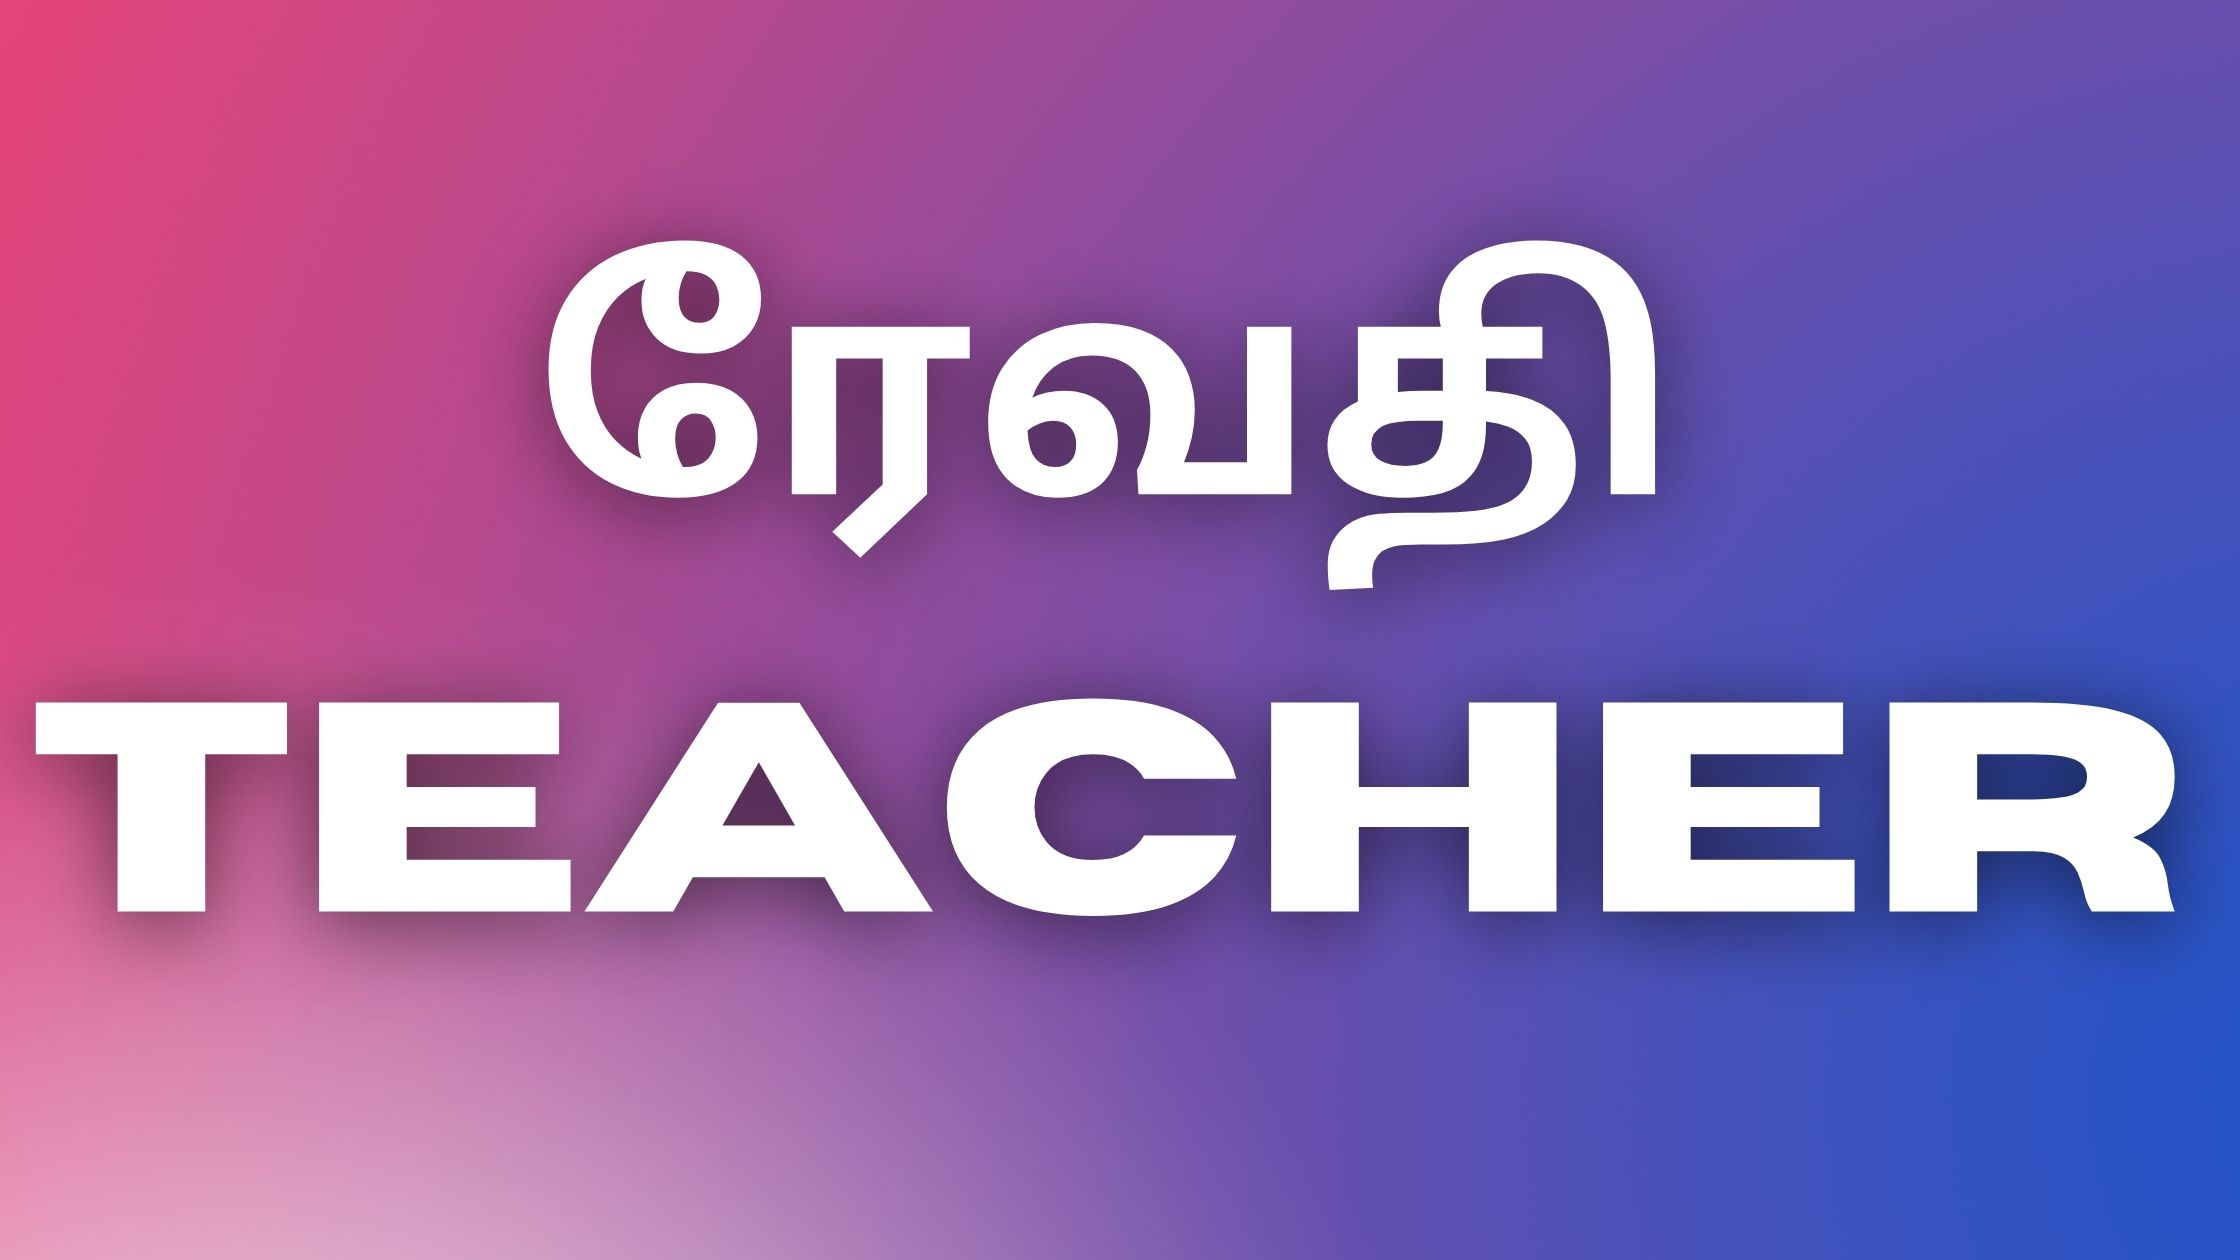 You are currently viewing tamilnewkaamakadhaigal ரேவதி TEACHER